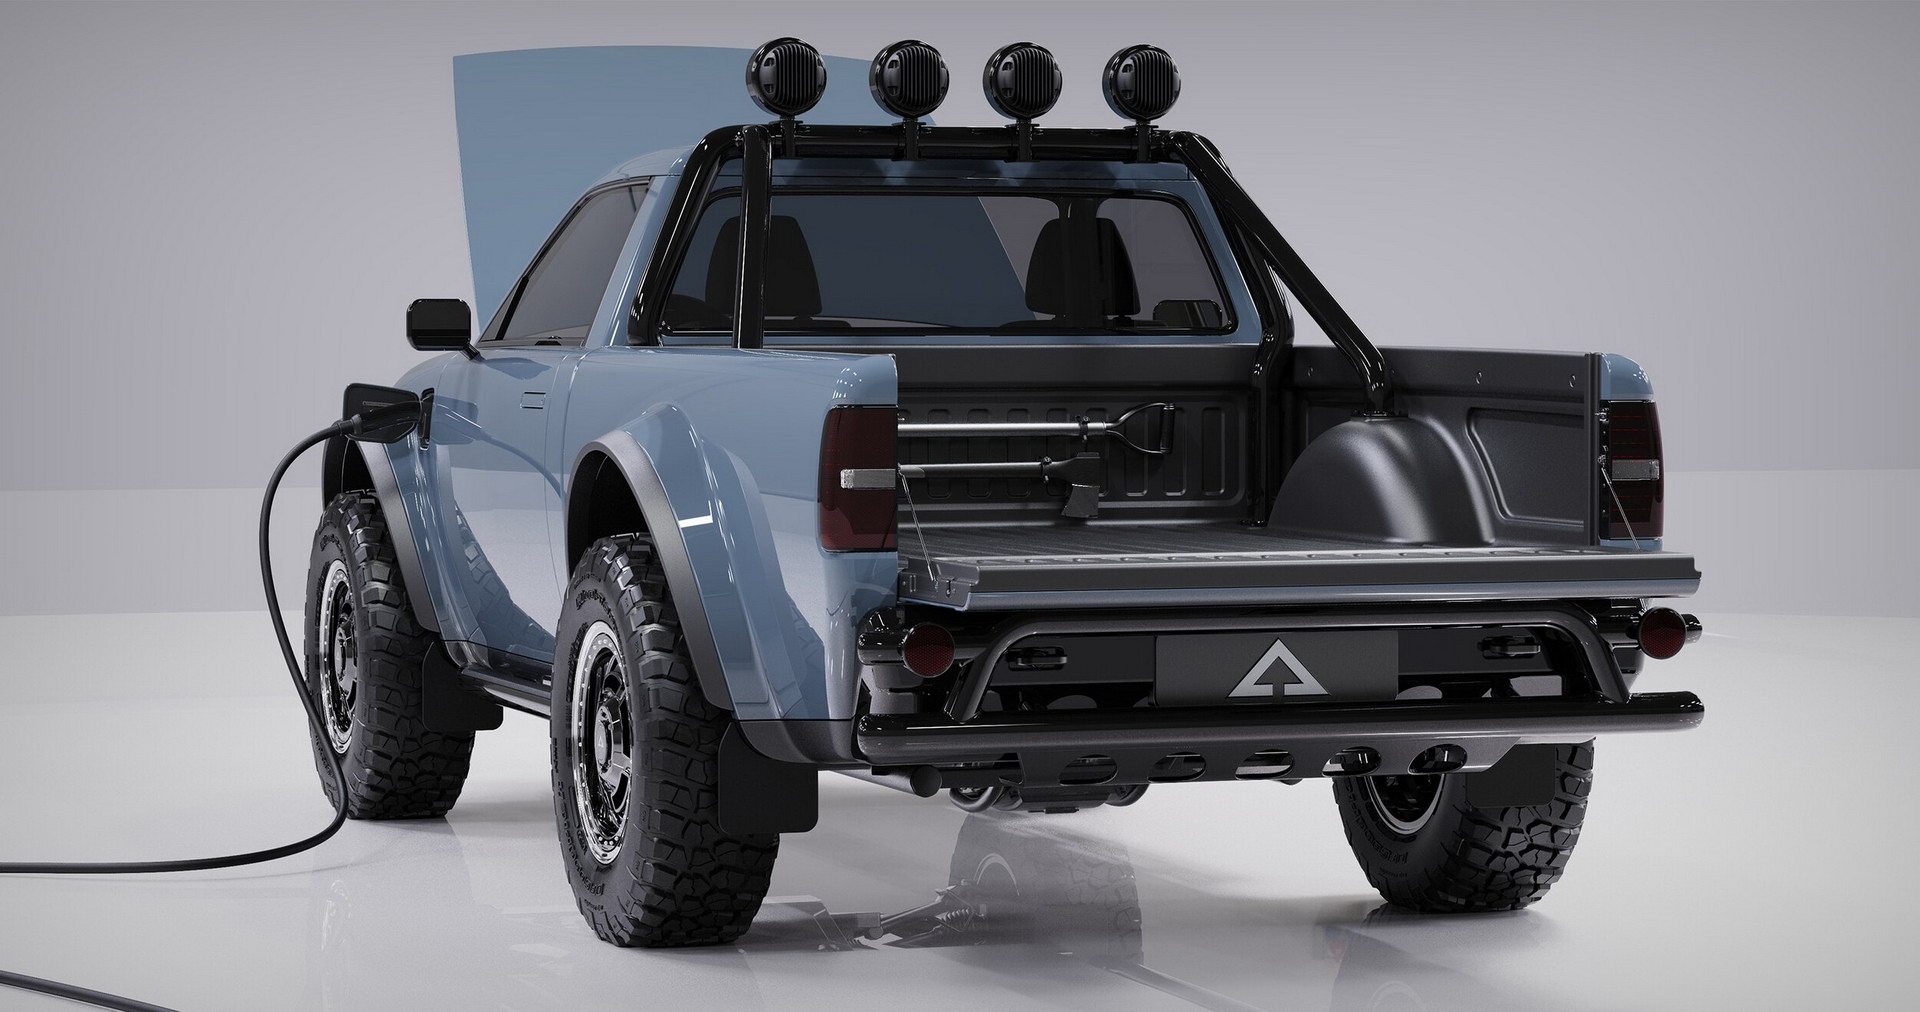 Alpha Wolf Compact EV Pickup Is A Modern Take On The Classic Truck